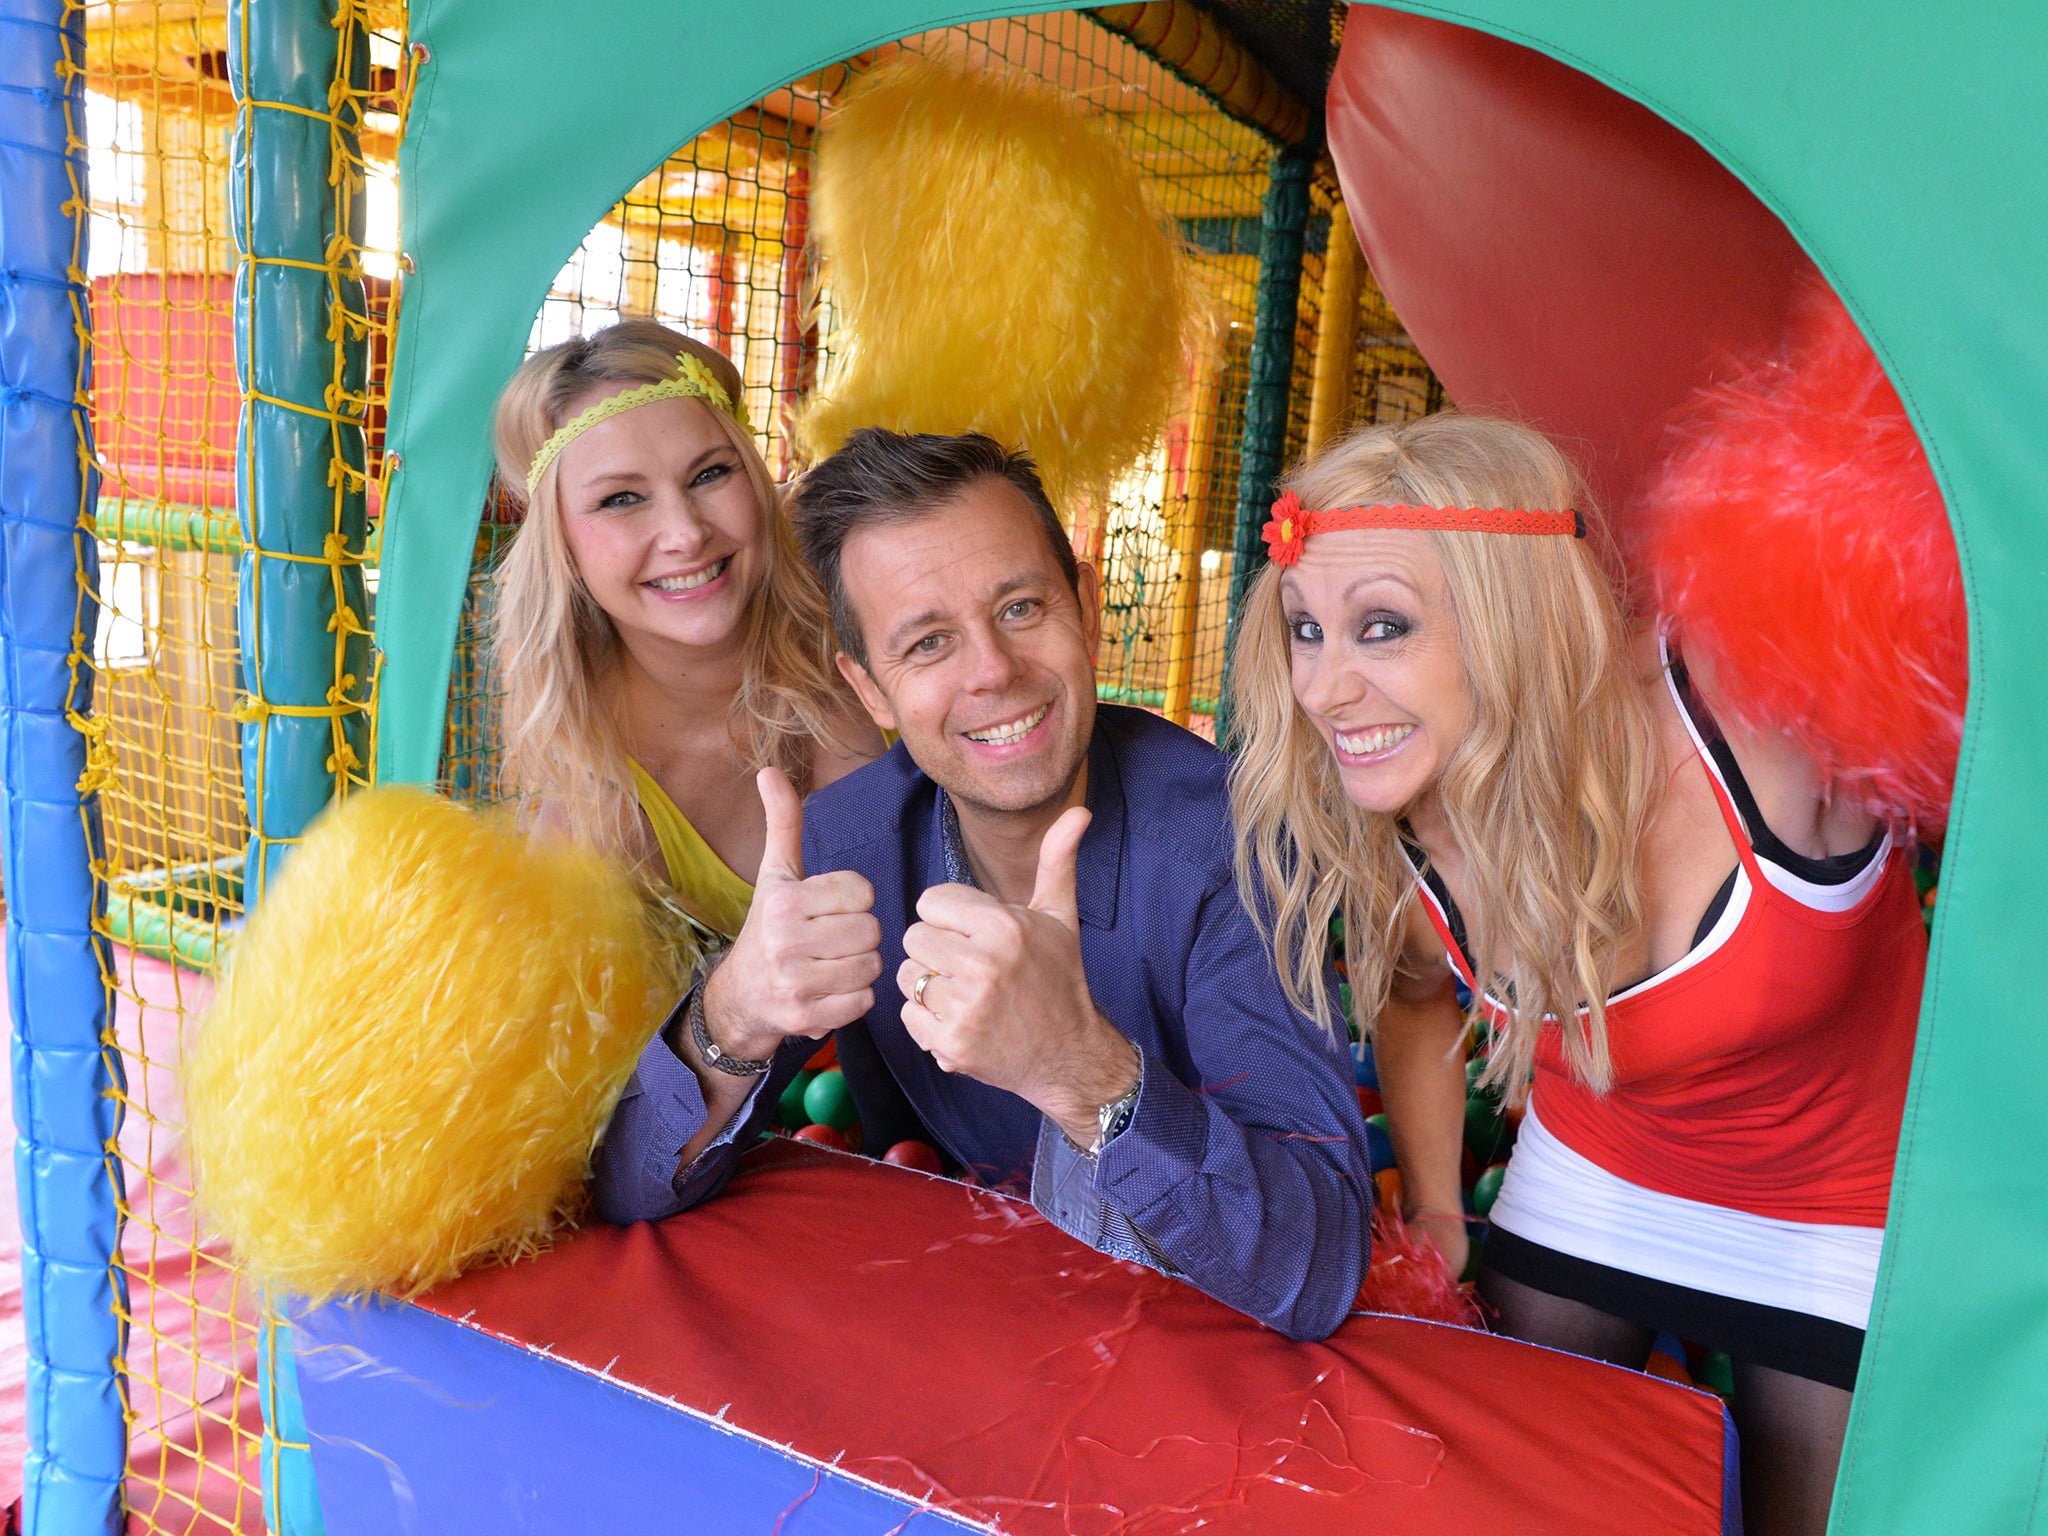 Pat Sharp and the Twins celebrating the return of Fun House